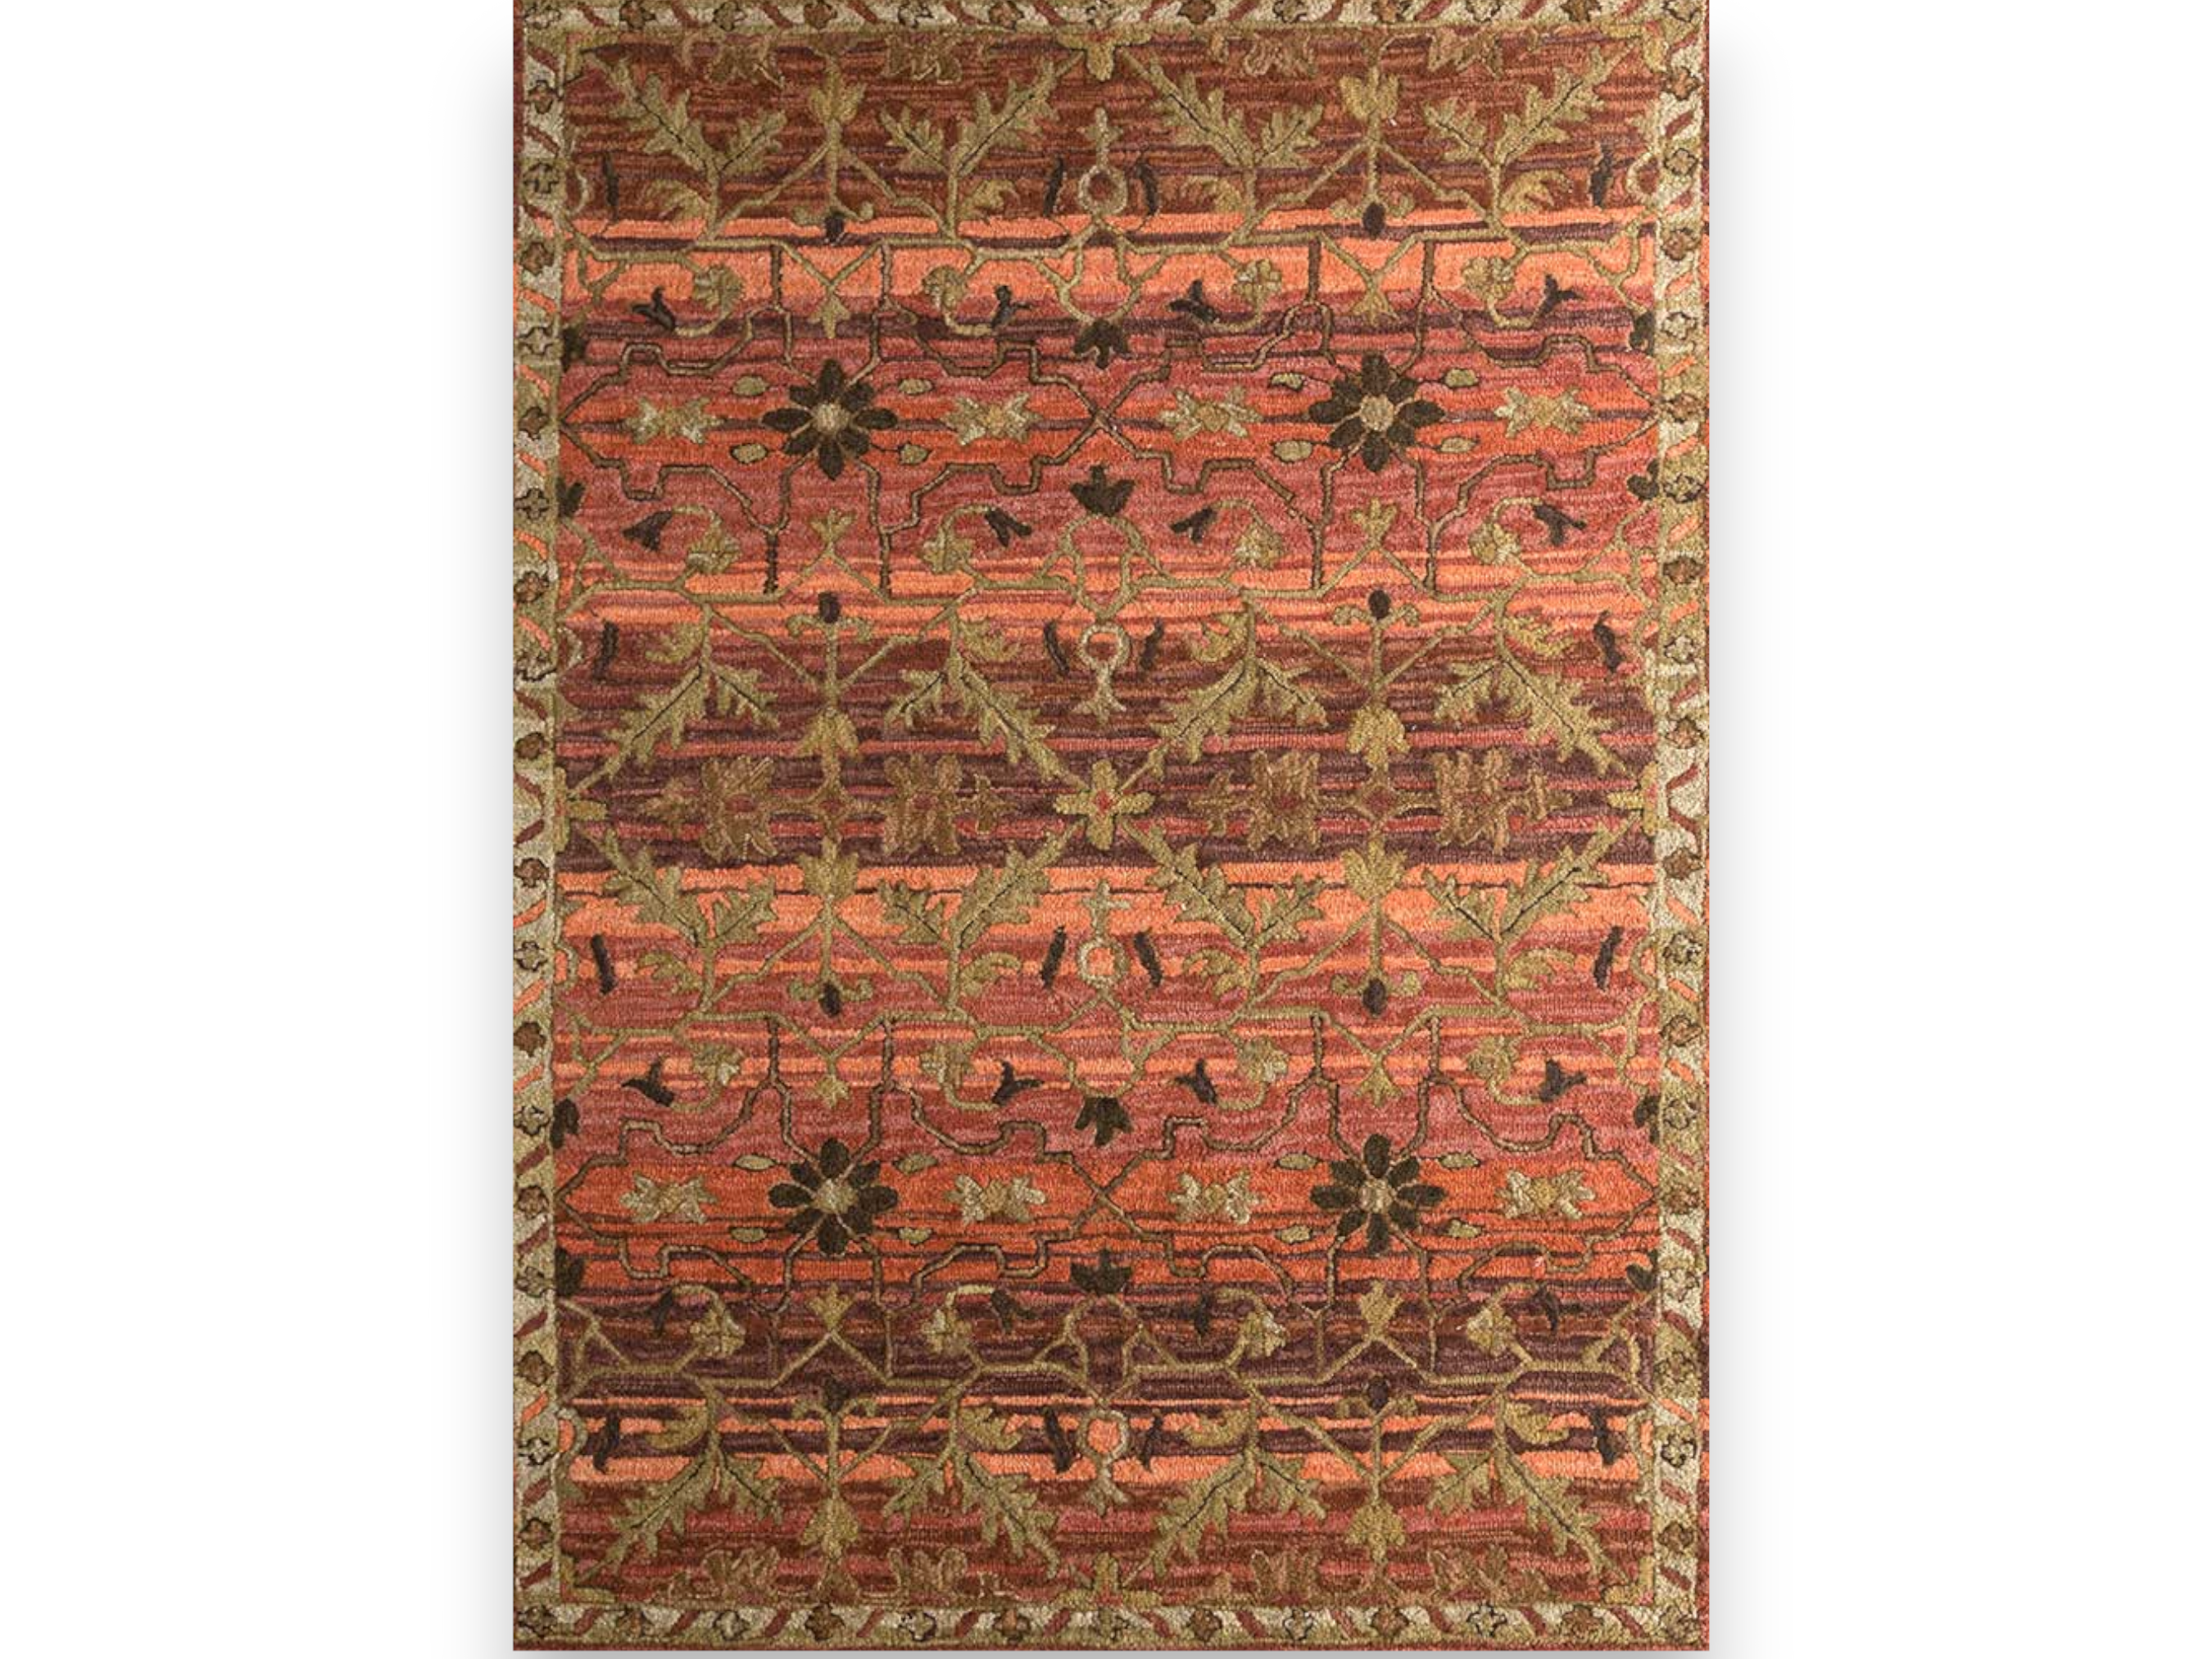 Handmade Persian Antique Designer Traditional Hand Tufted 100% Woolen Area Rugs/ Carpets For Living Room, Bedroom, Kitchen